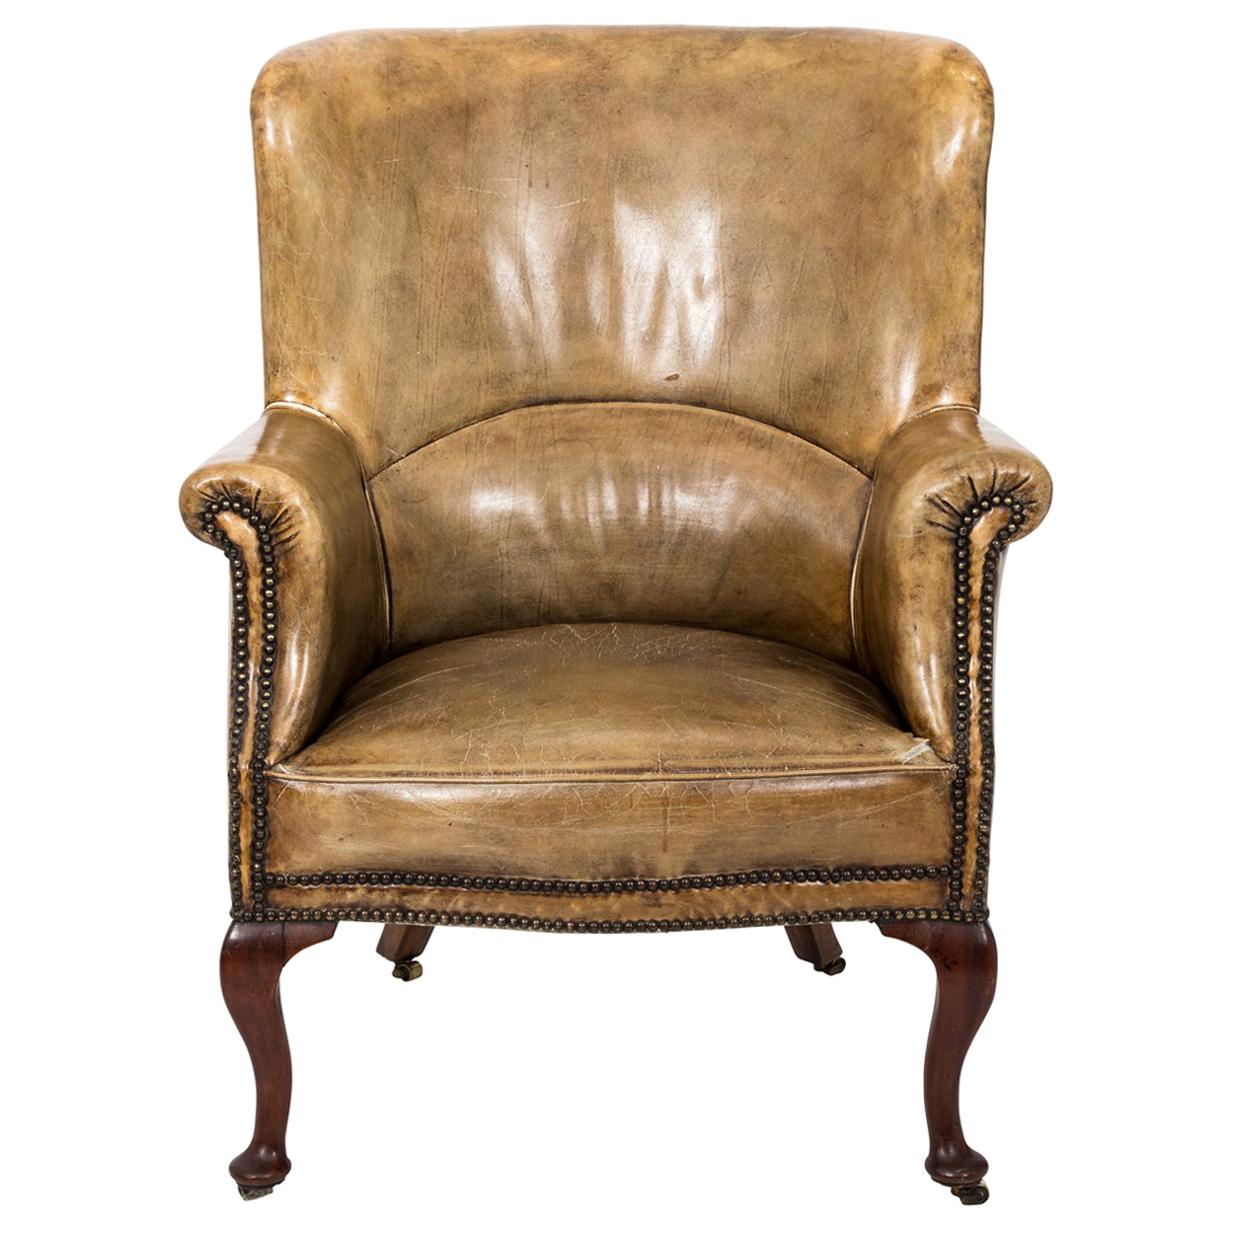 Early 19th Century French Leather Wing Chair